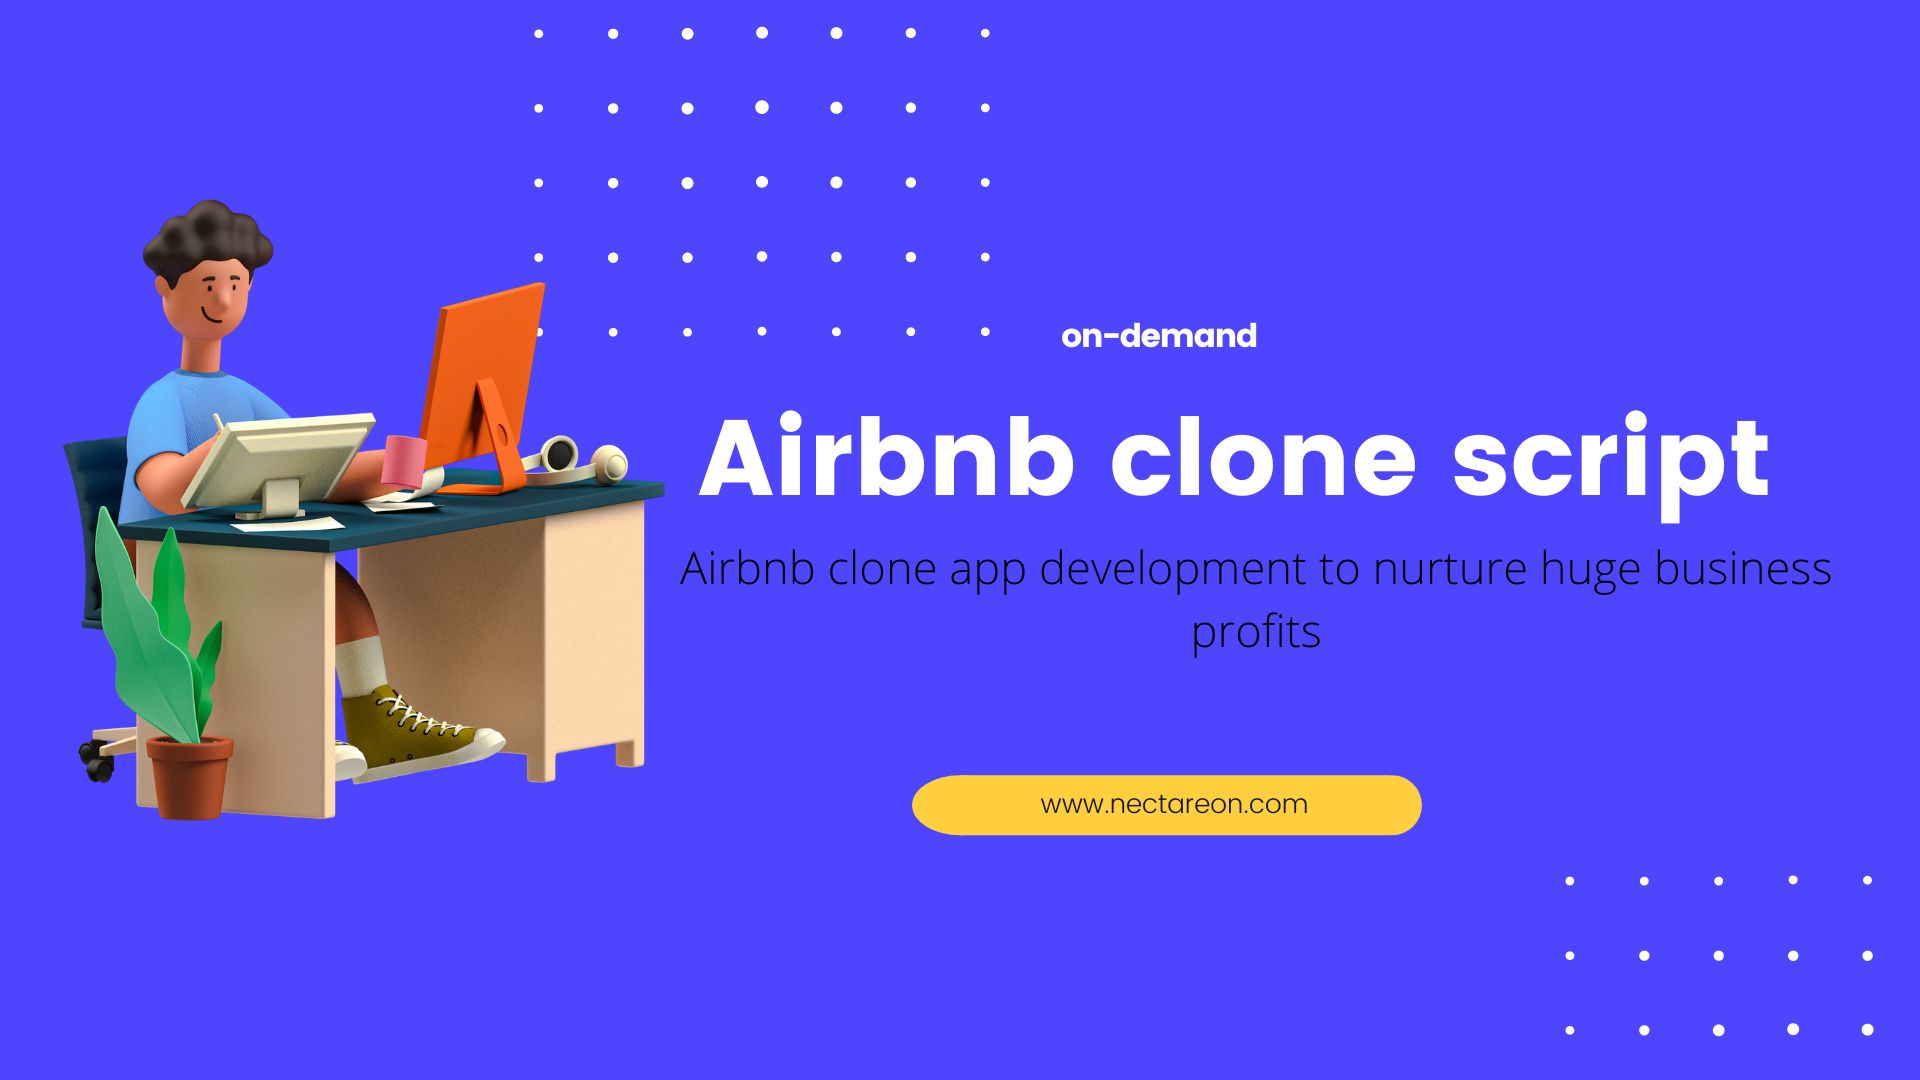 How to start online rental business with airbnb clone script?